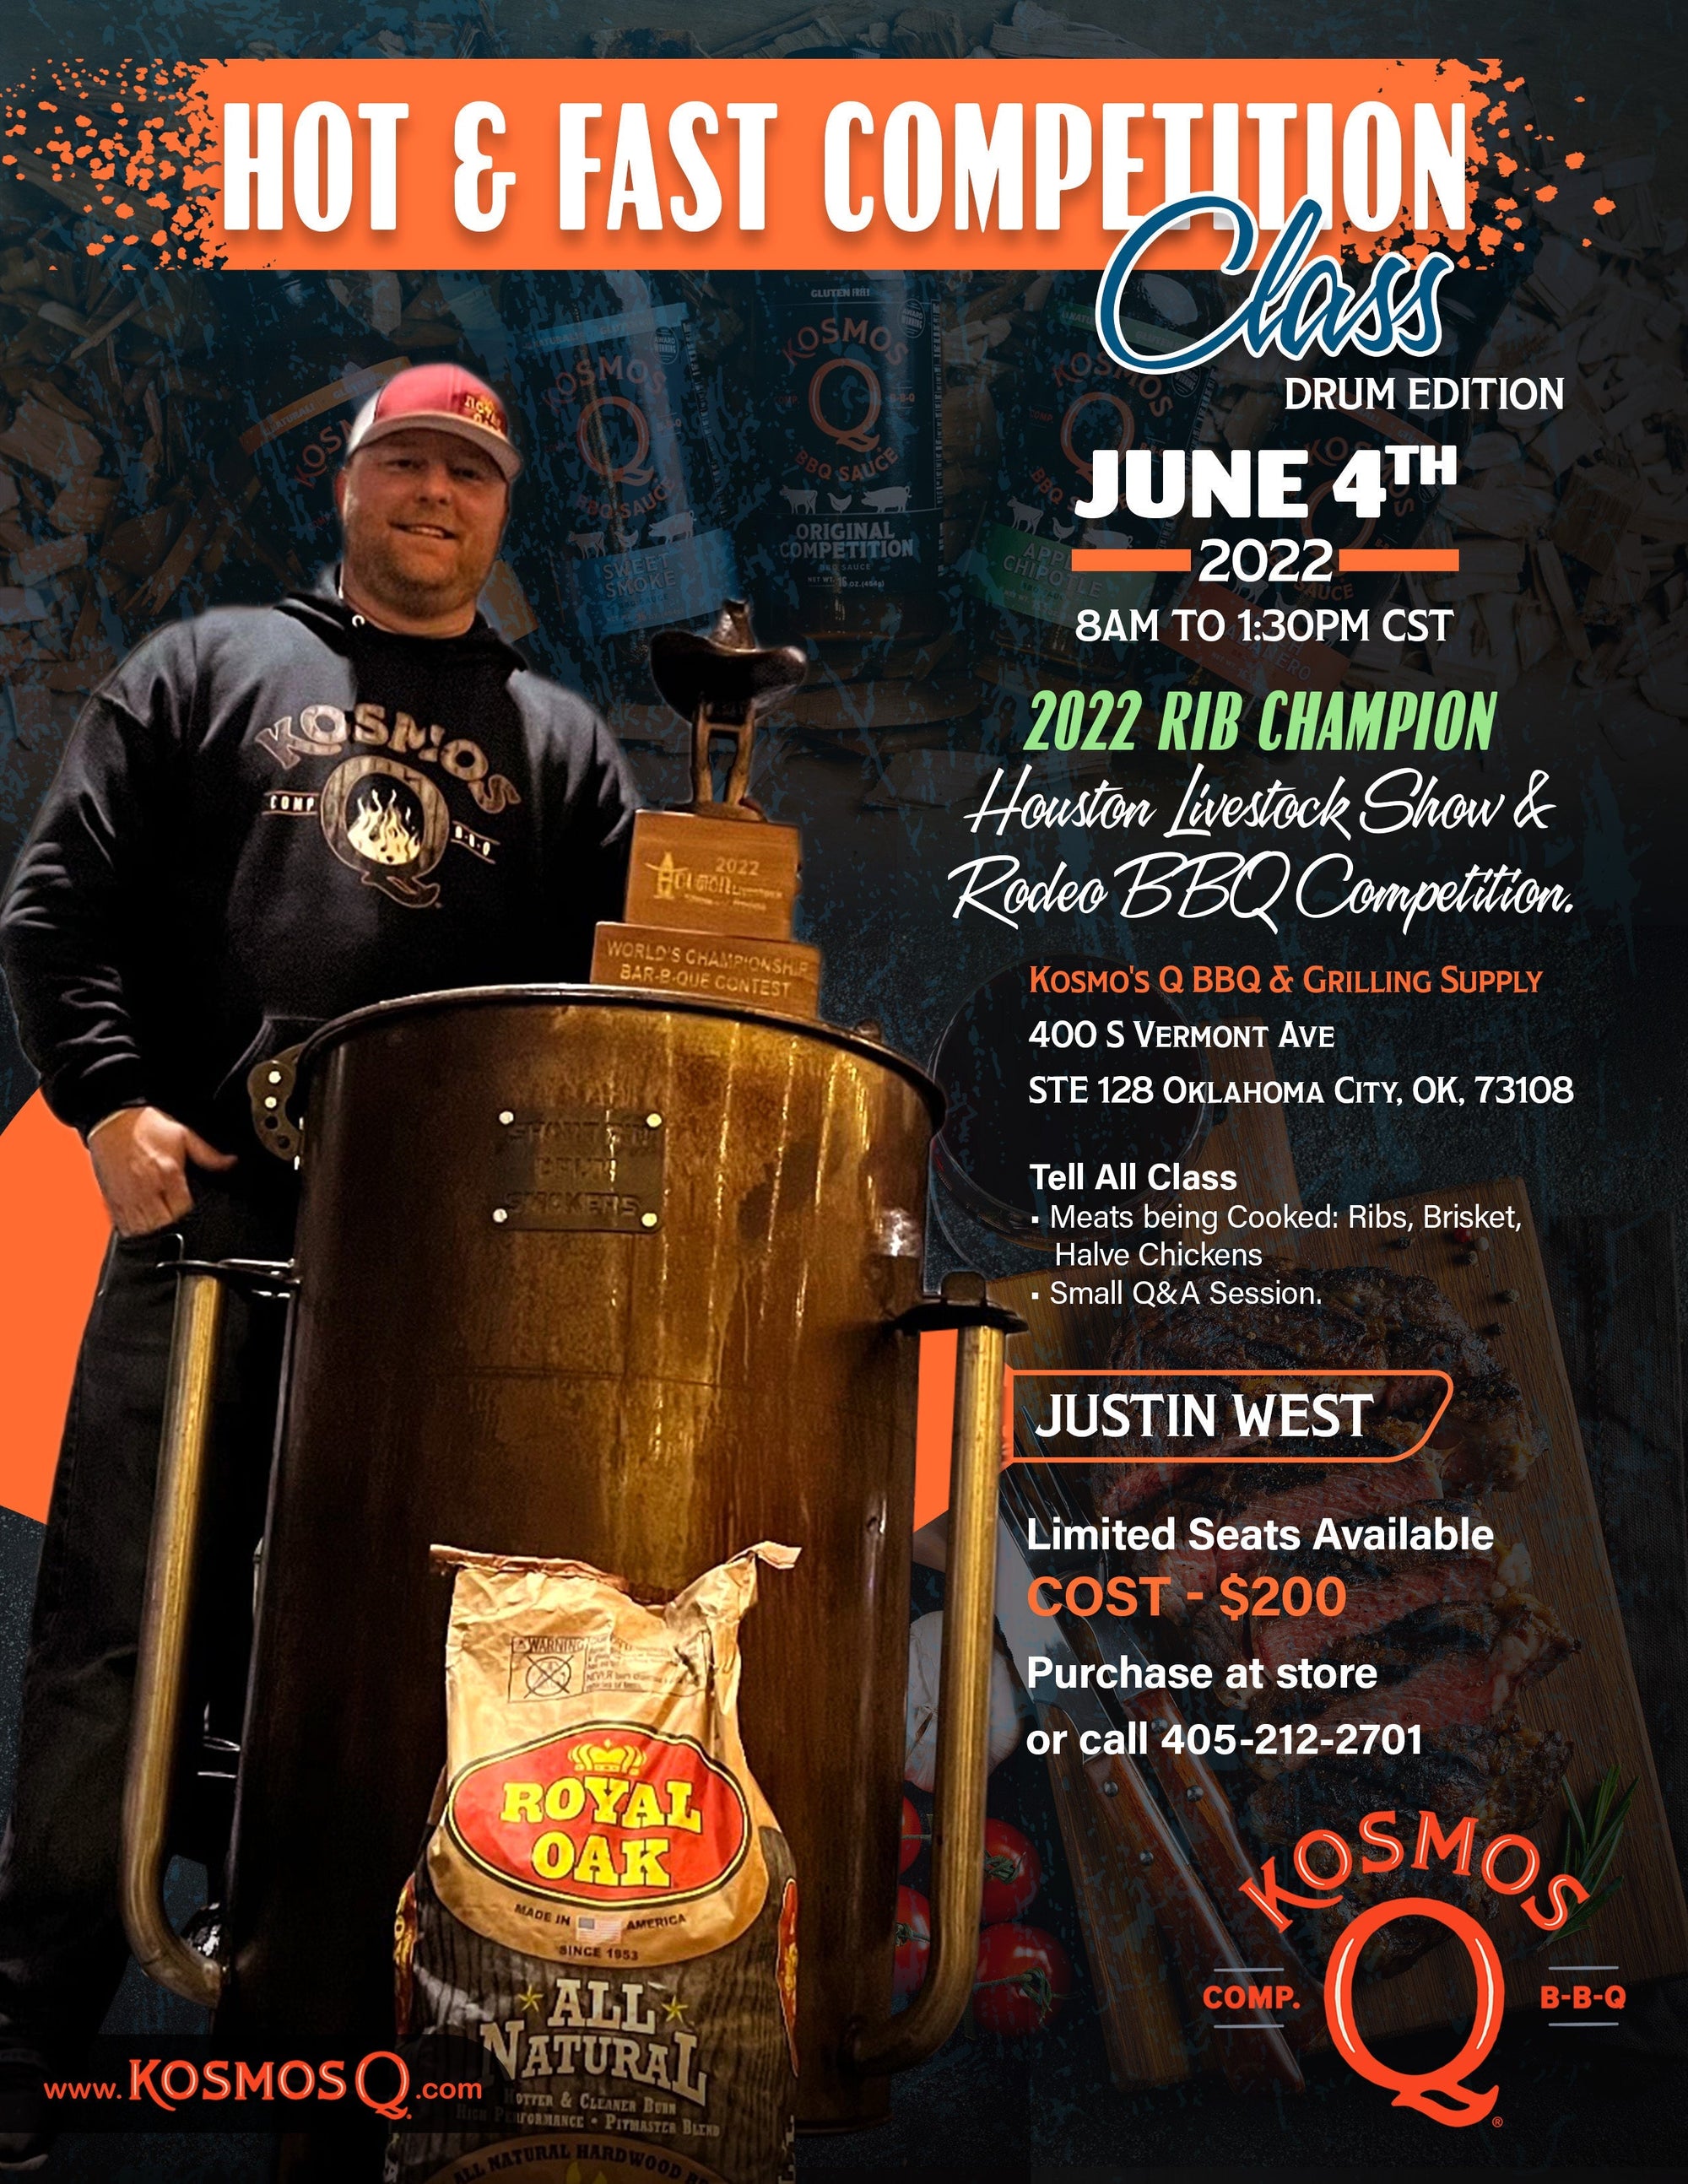 Kosmos Q BBQ Products & Supplies Live in Person @ Kosmos Q Grilling and BBQ Supply in OKC Hot & Fast Competition Class - Drum Edition with 2022 Rib Champion Justin West